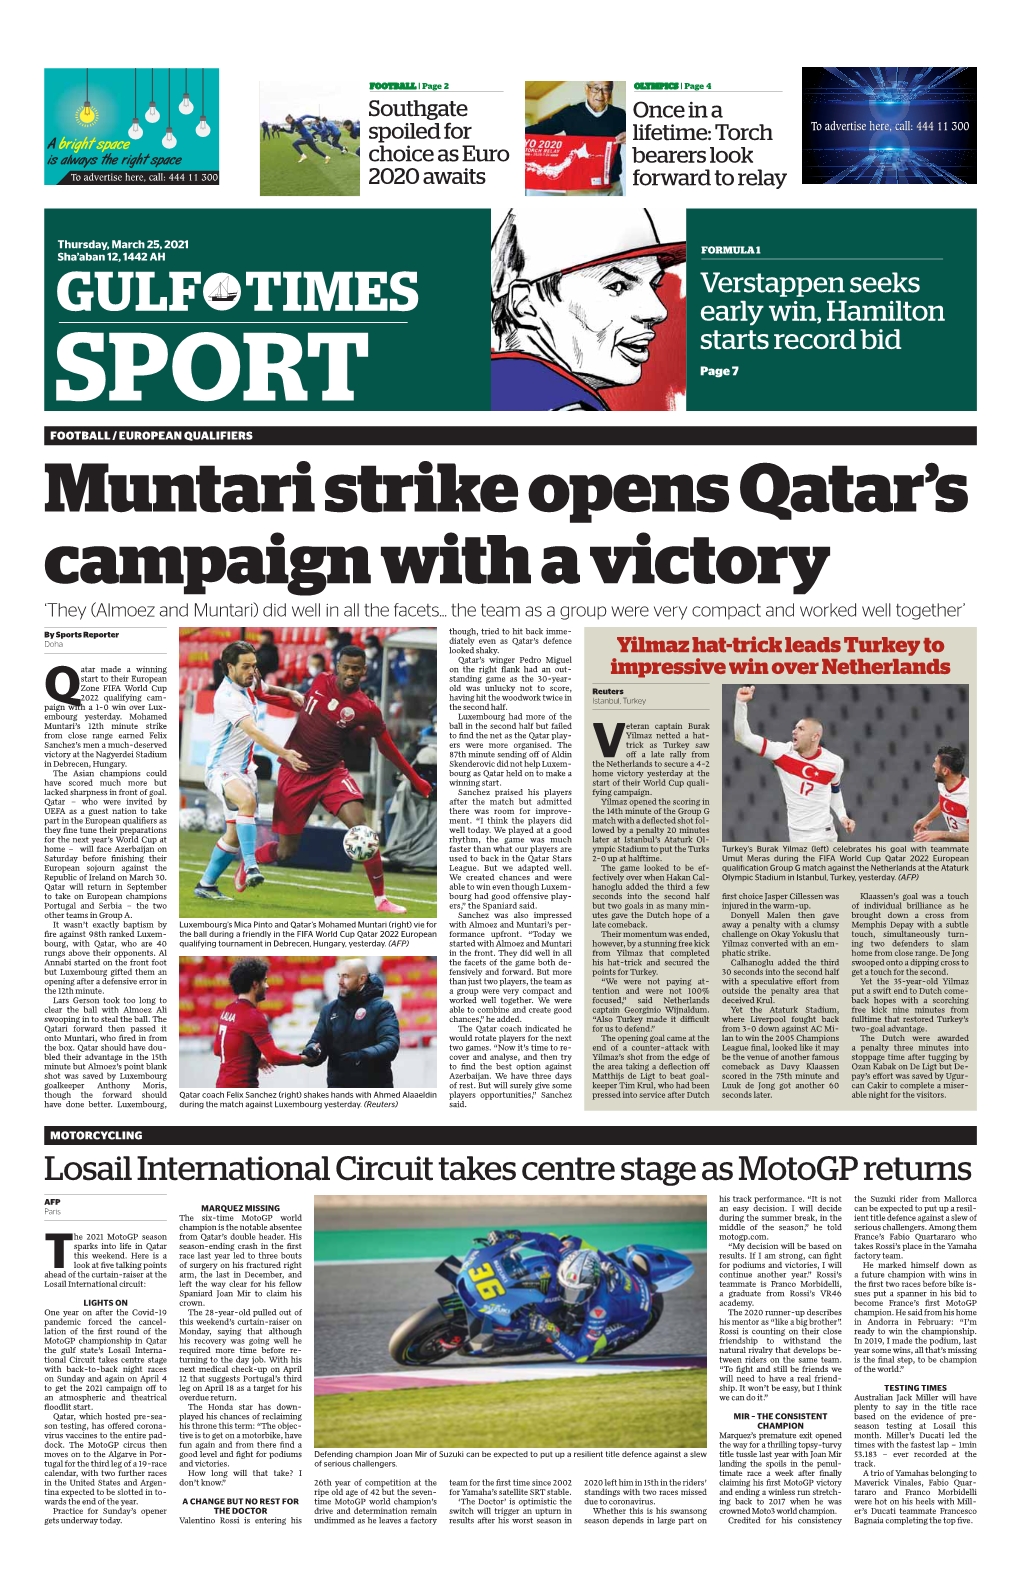 Muntari Strike Opens Qatar's Campaign with a Victory